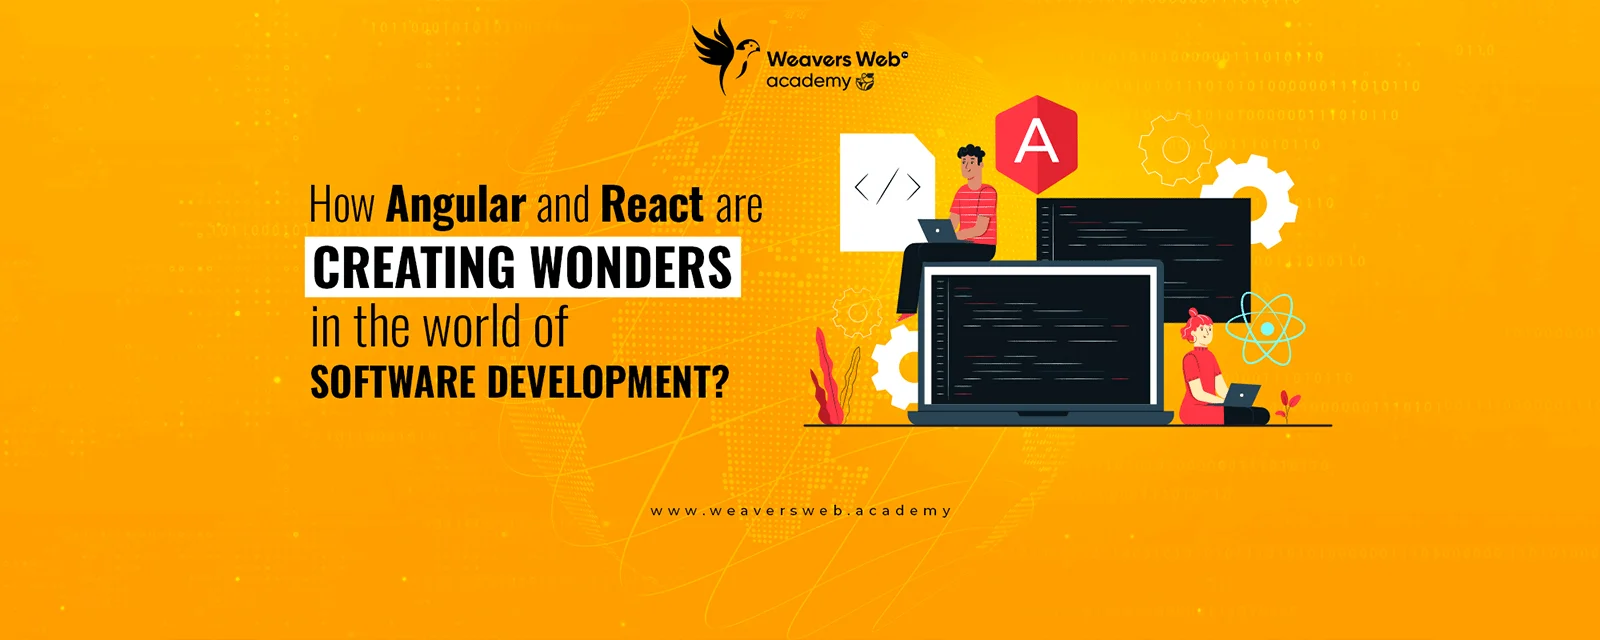 How angular and react are creating wonders in the world of software development?